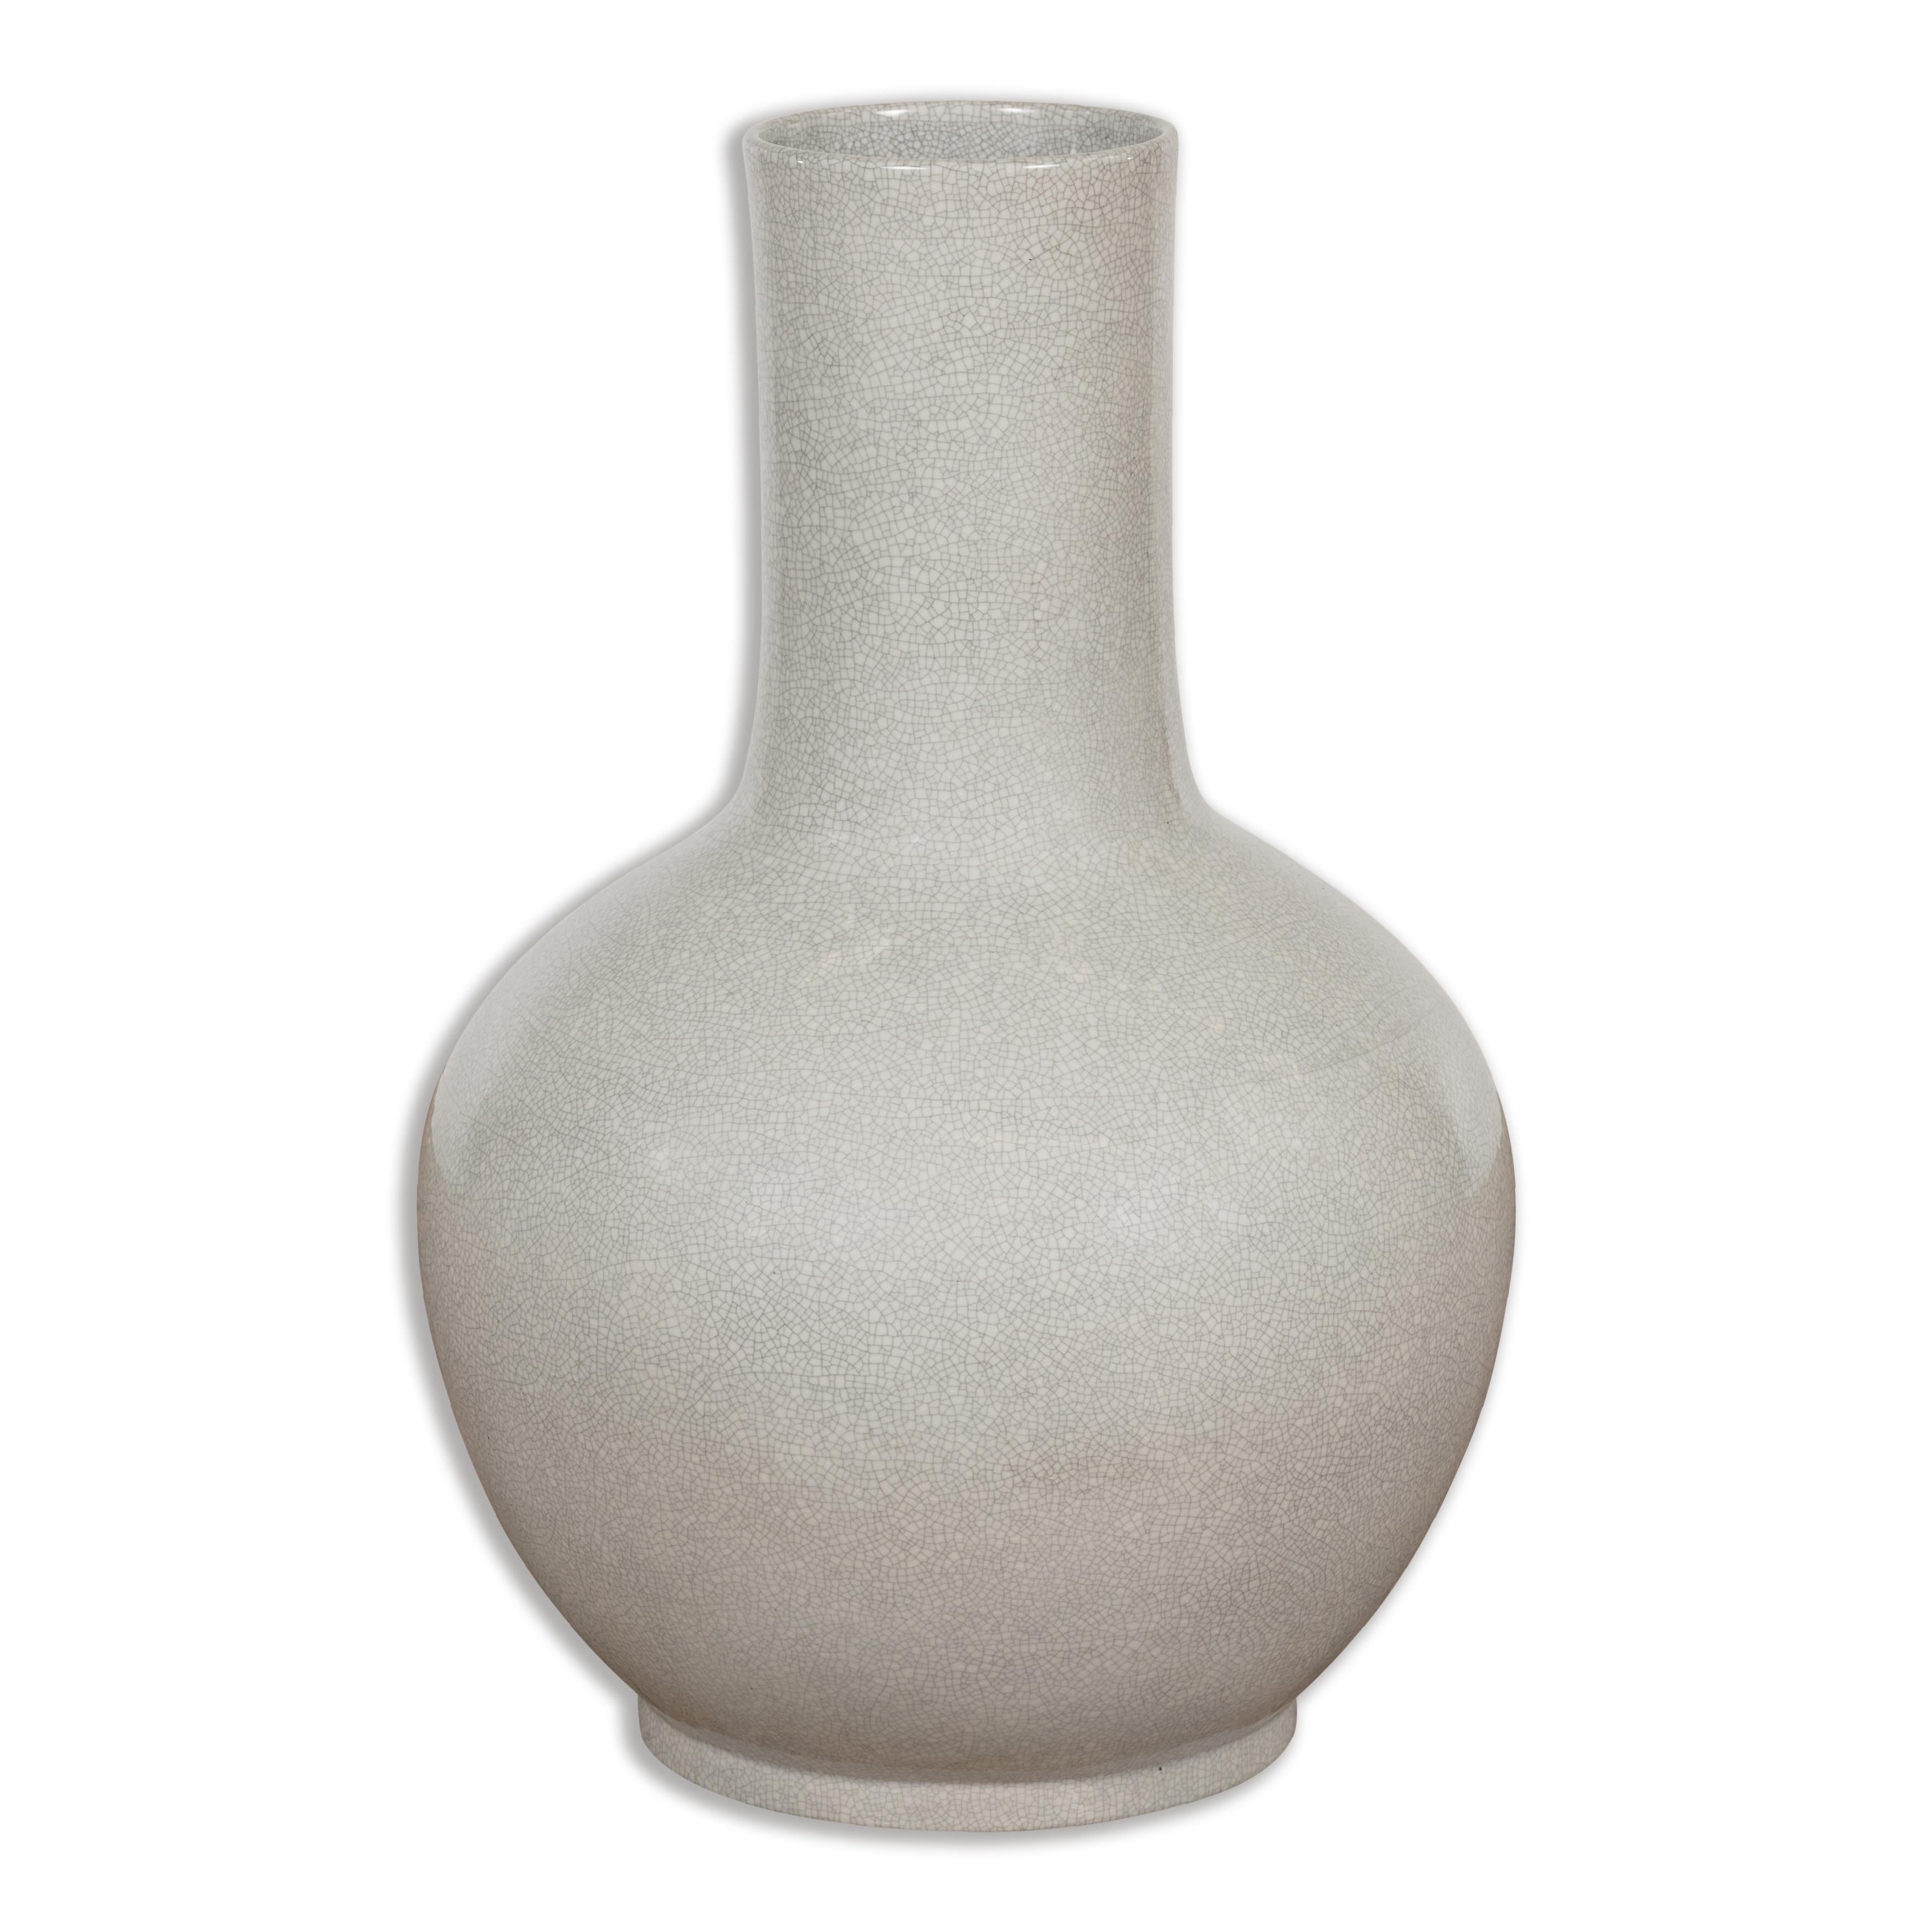 Chinese Vintage Kendi Shape Vase with Crackle Grey and White Finish For Sale 8